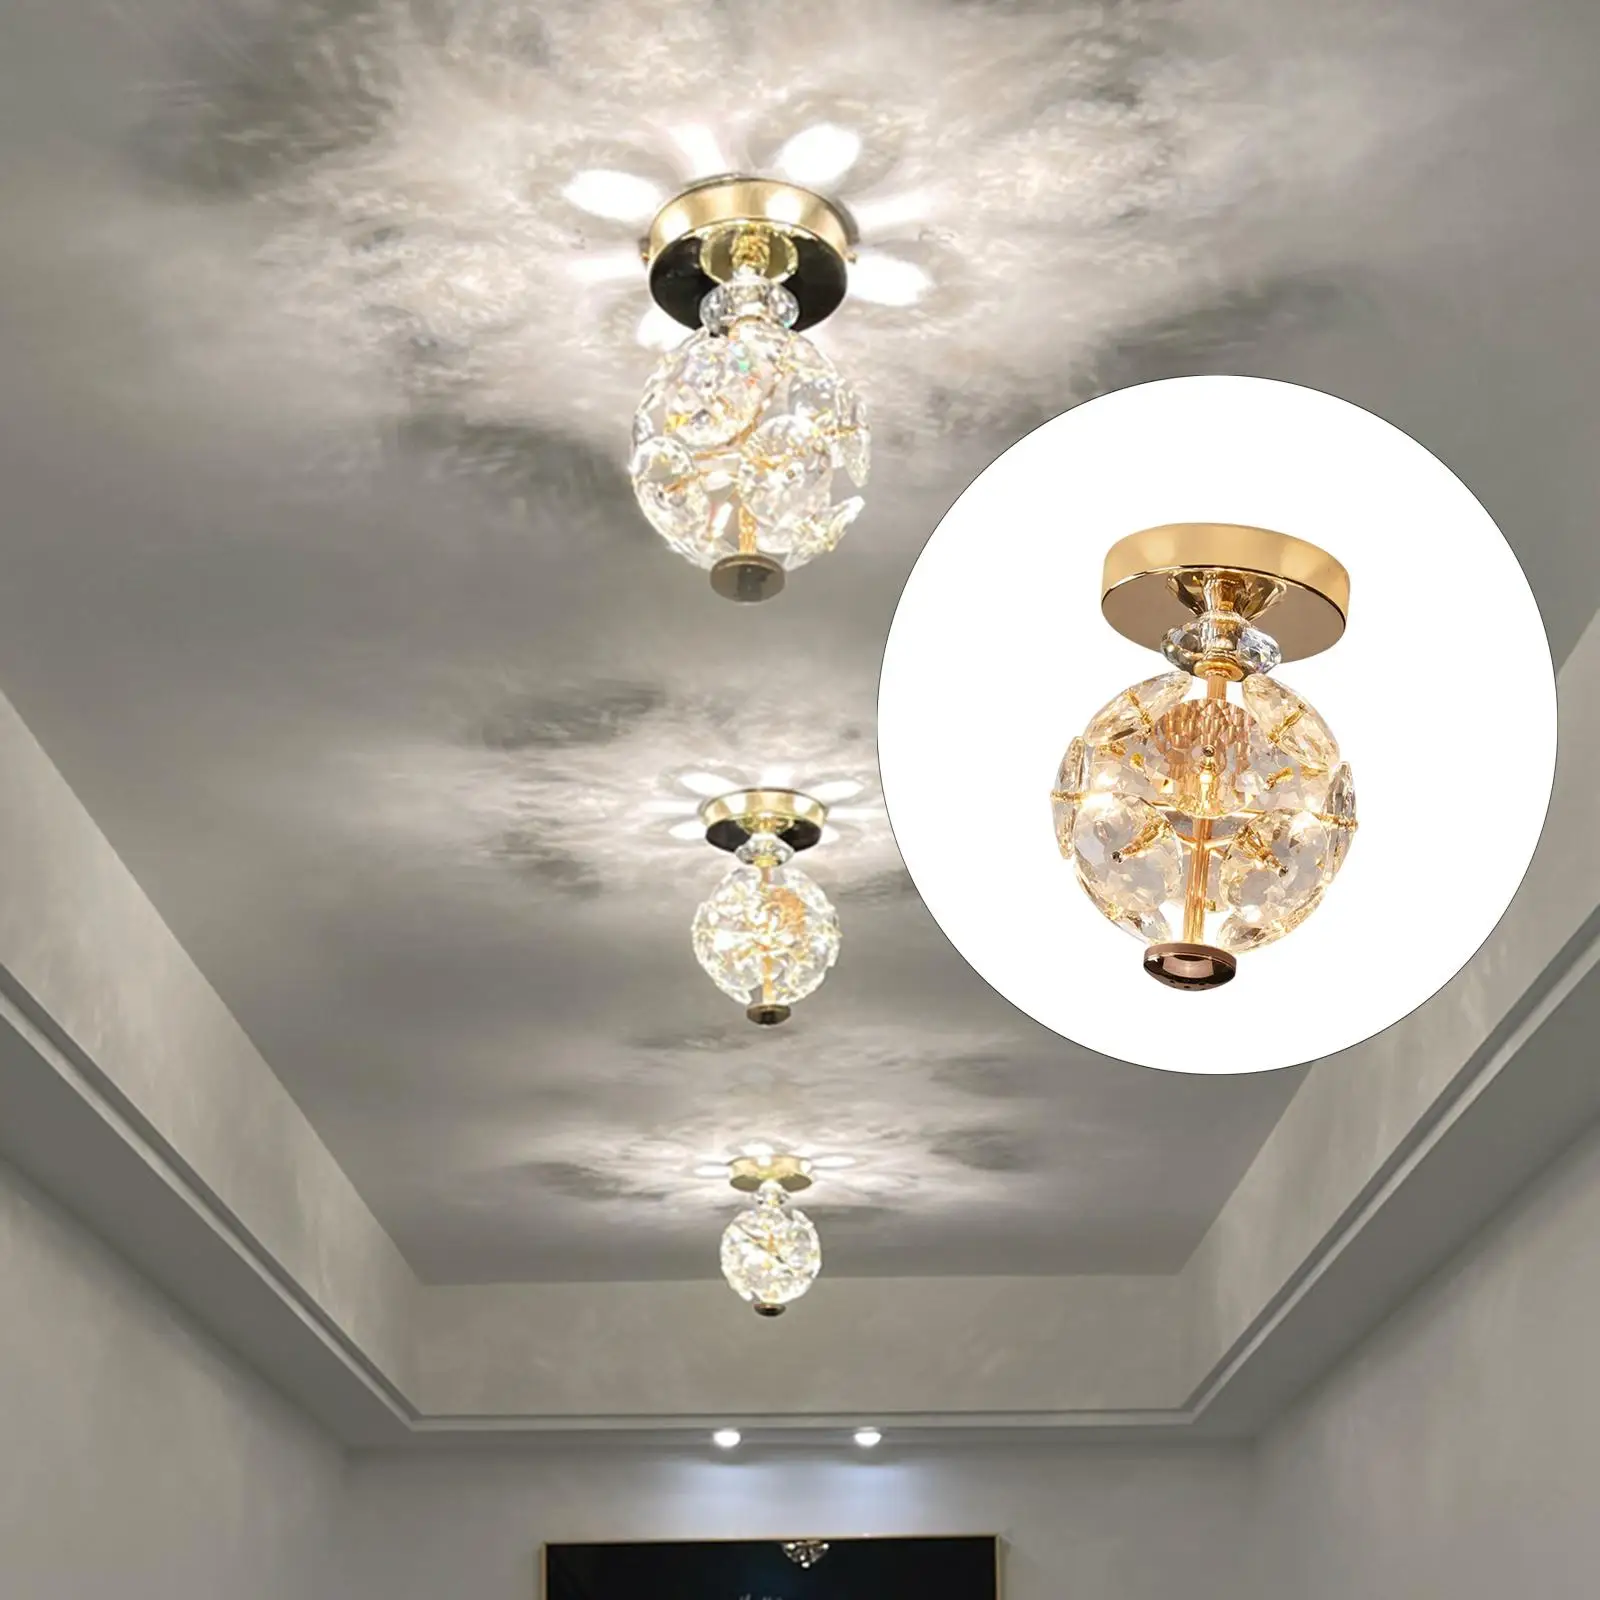 Luxury LED Ceiling Light Ceiling Lamp Indoor Lighting for Entryway Bedroom